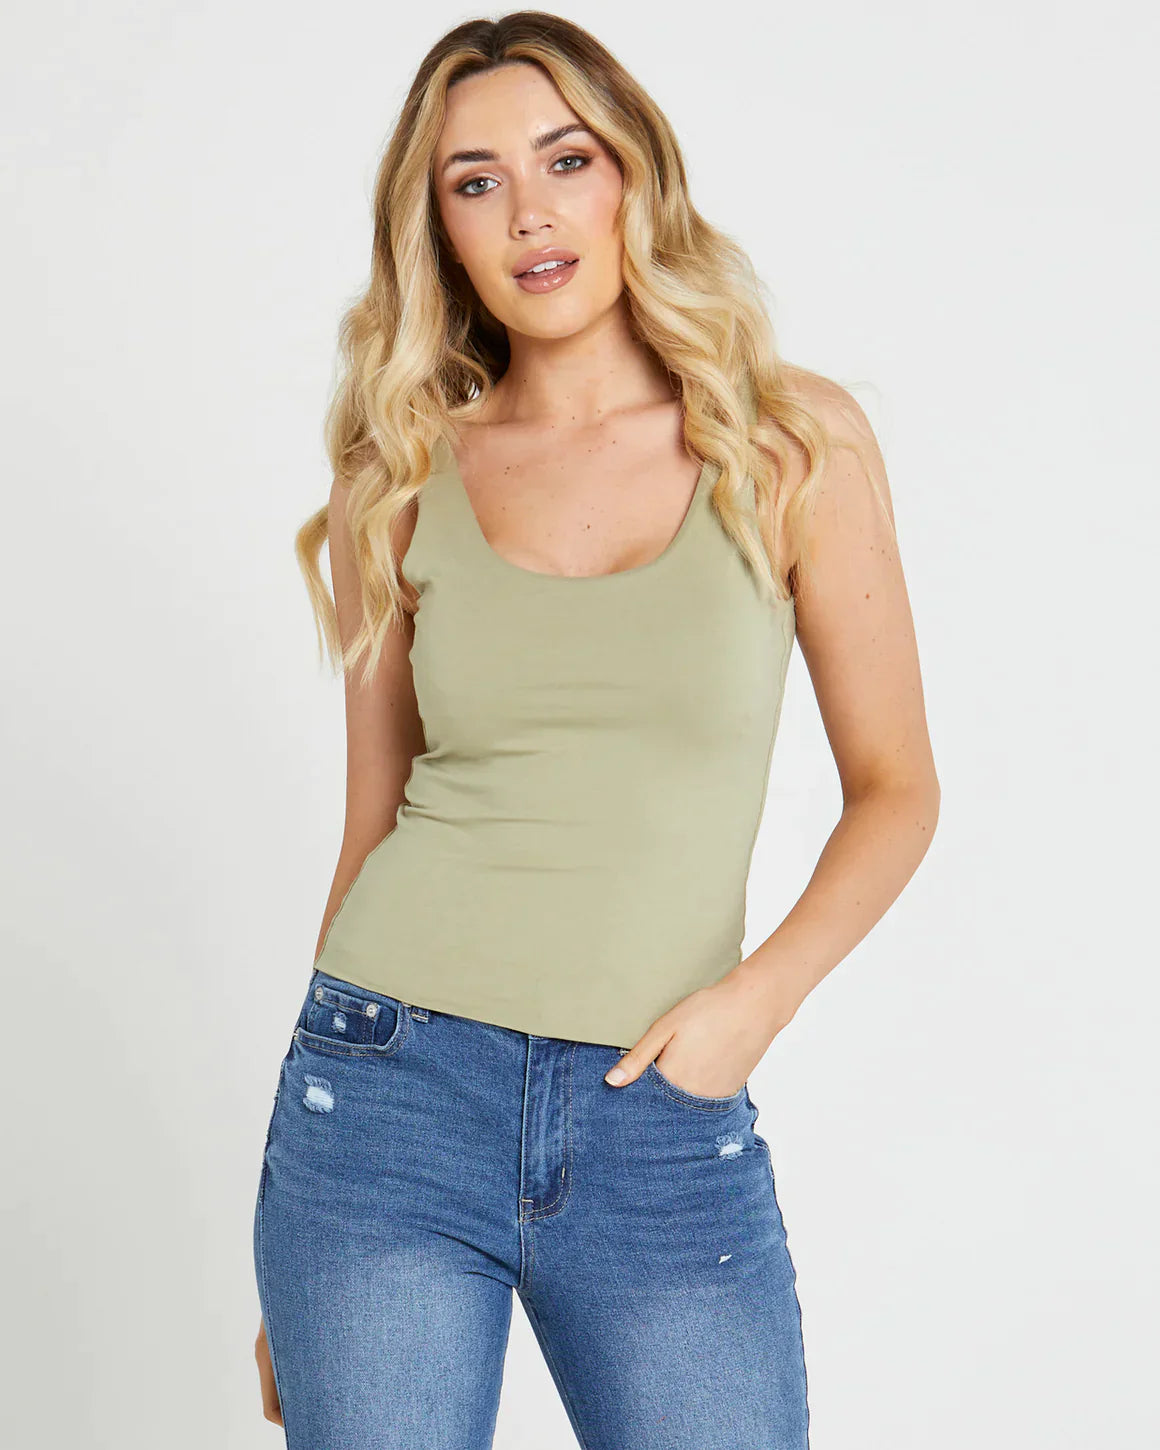 Cassie Singlet Tank - Sage | Sass Clothing | Introducing the Cassie Singlet. From errands to "out”, this singlet's stylish and sassy design shows off your curves without skimping on comfiness. A basic that pack